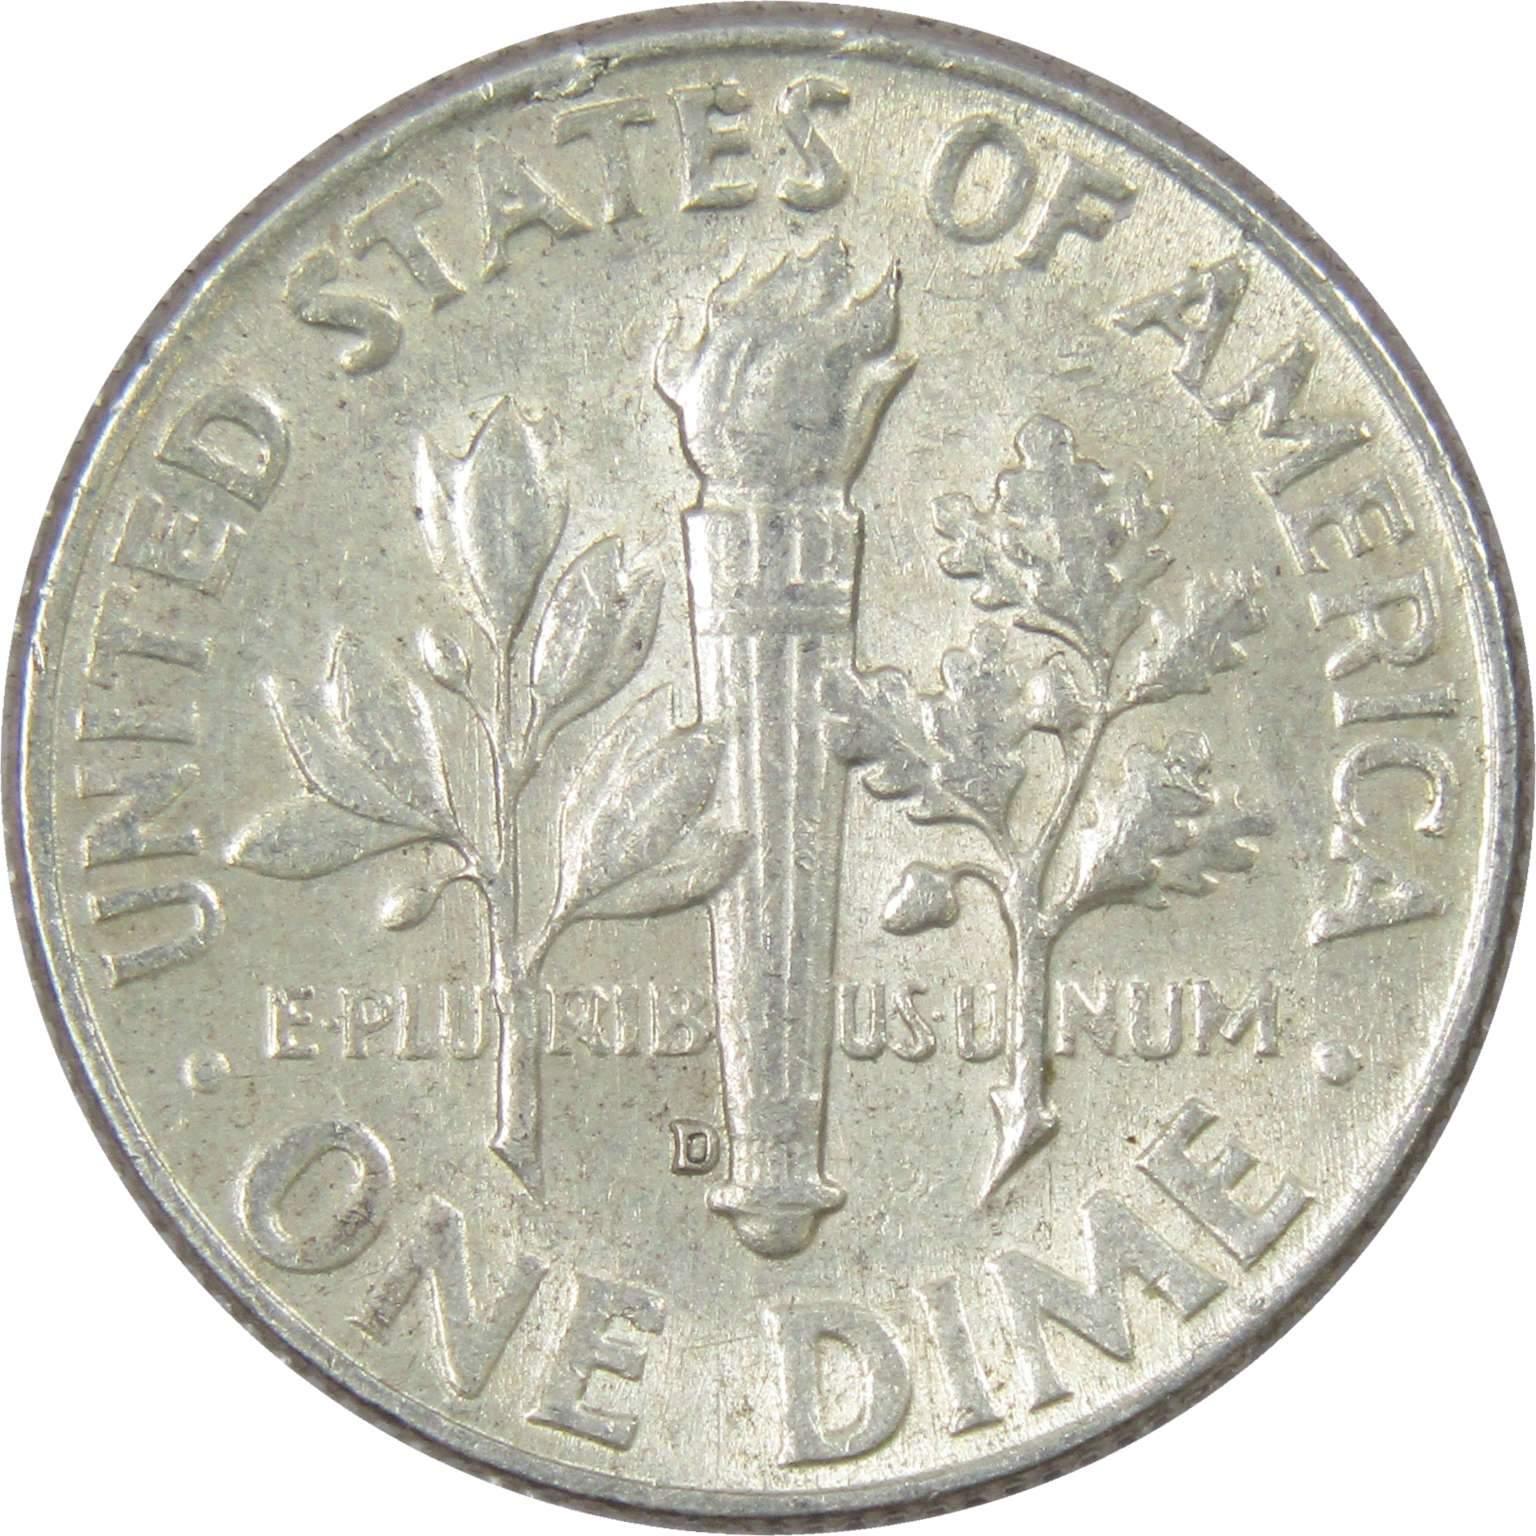 1964 D Roosevelt Dime AG About Good 90% Silver 10c US Coin Collectible